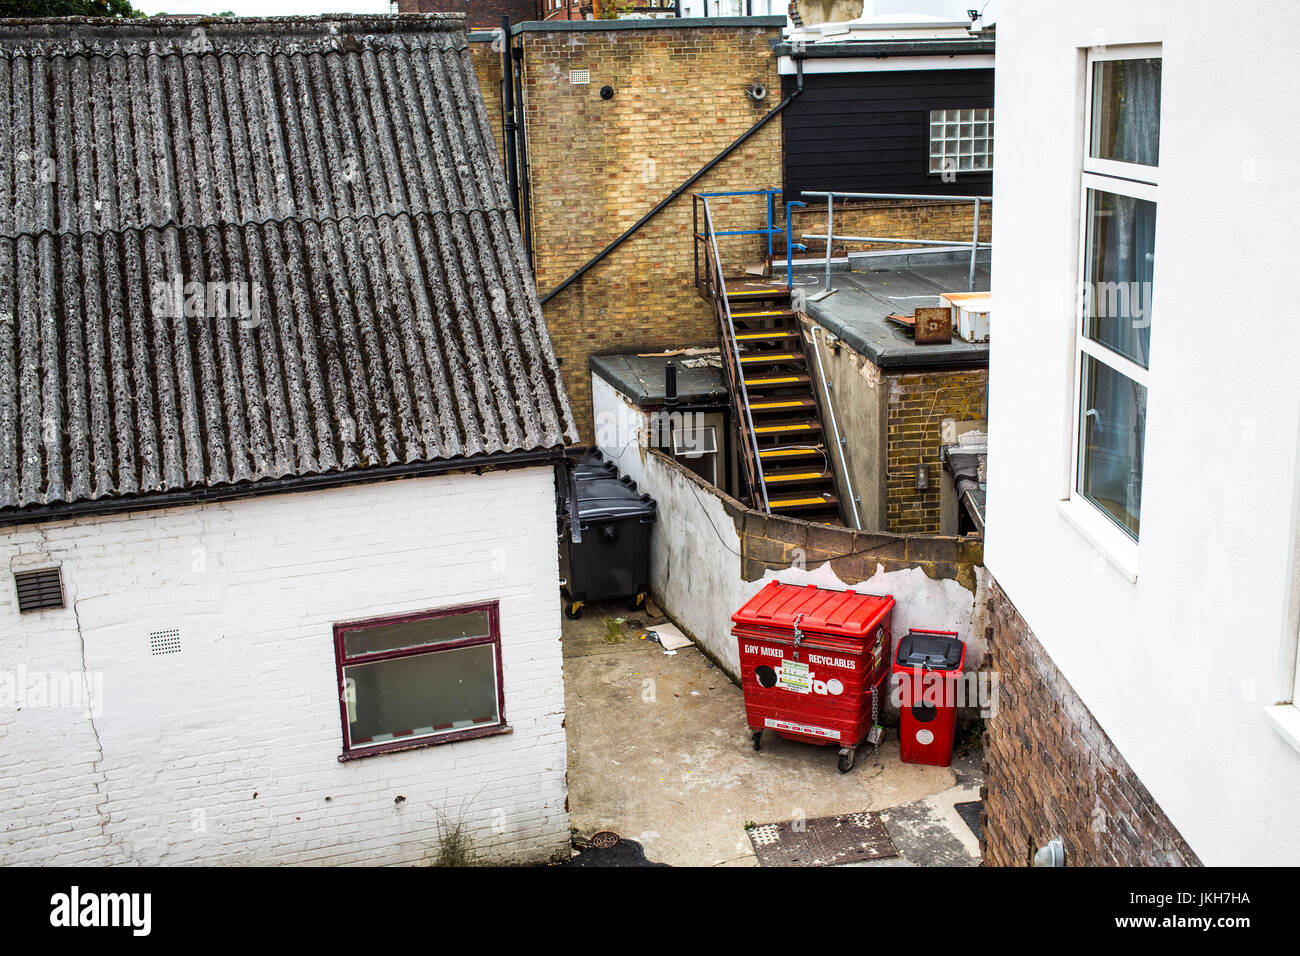 Urban Alleyway with Red Wheely Bins in Disrepair and Brick Buildings with No People Stock Photo